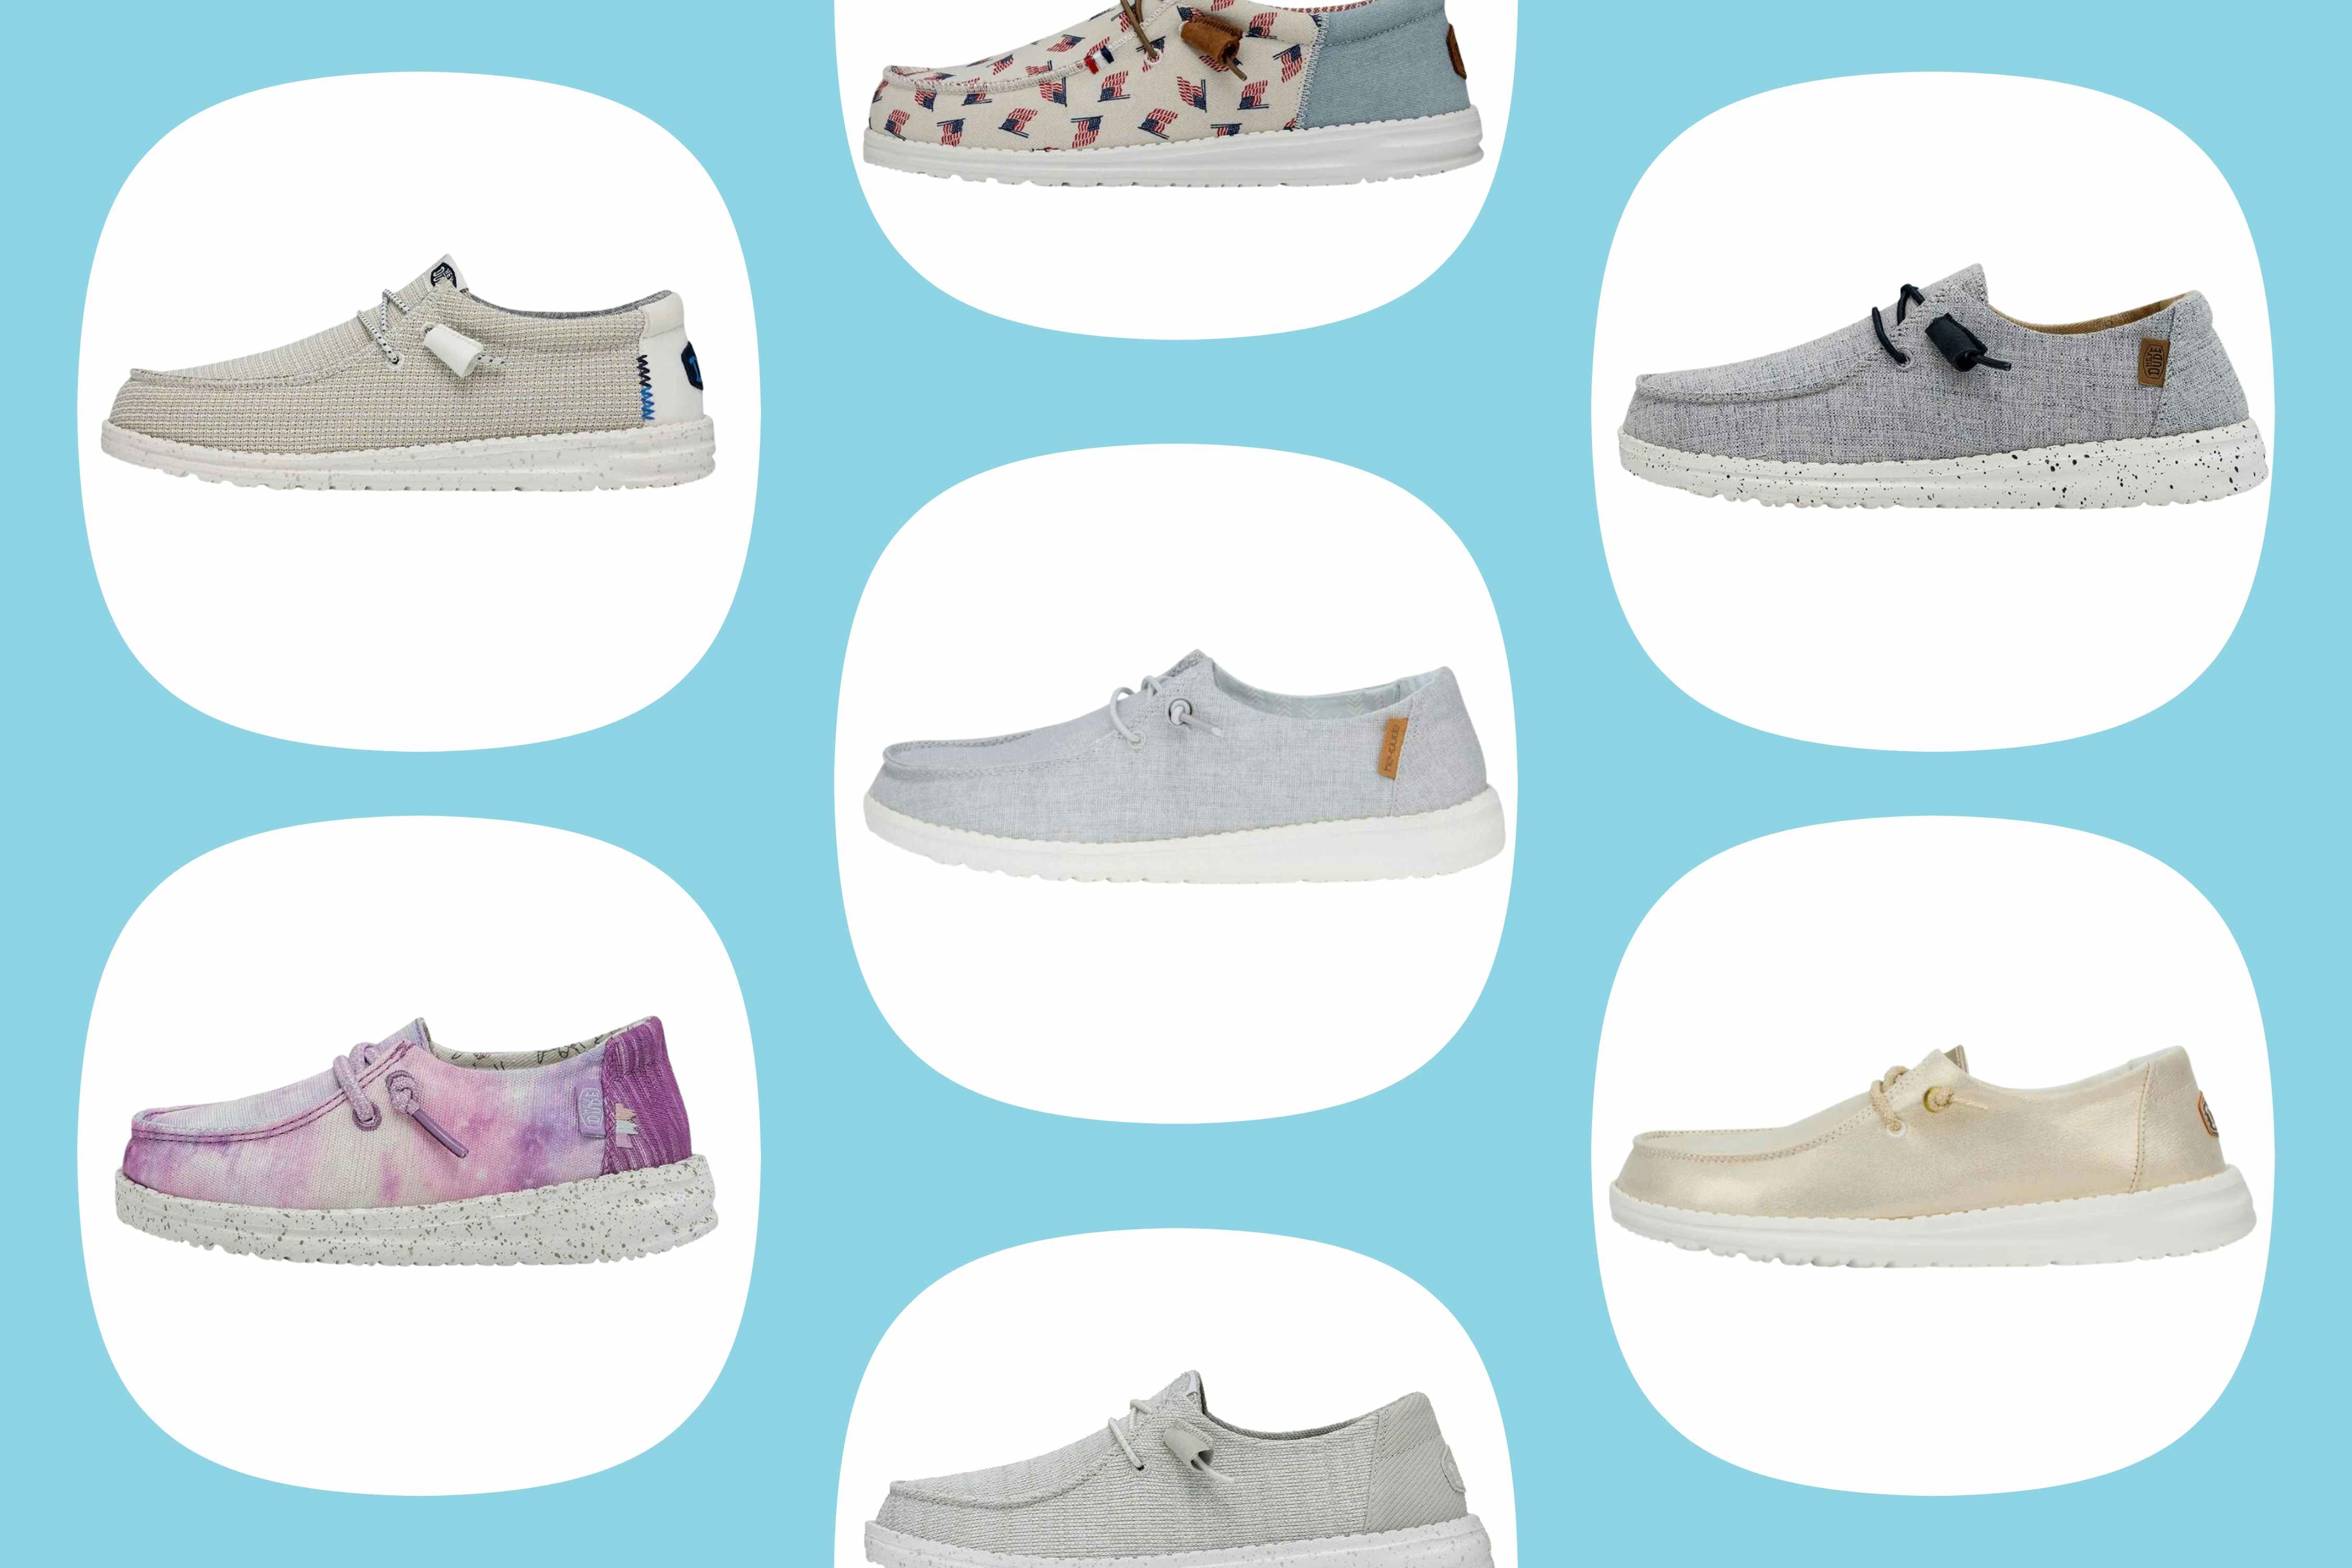 Memorial Day Sale at Hey Dude: $25 Women's Shoes, $27 Toddler Shoes